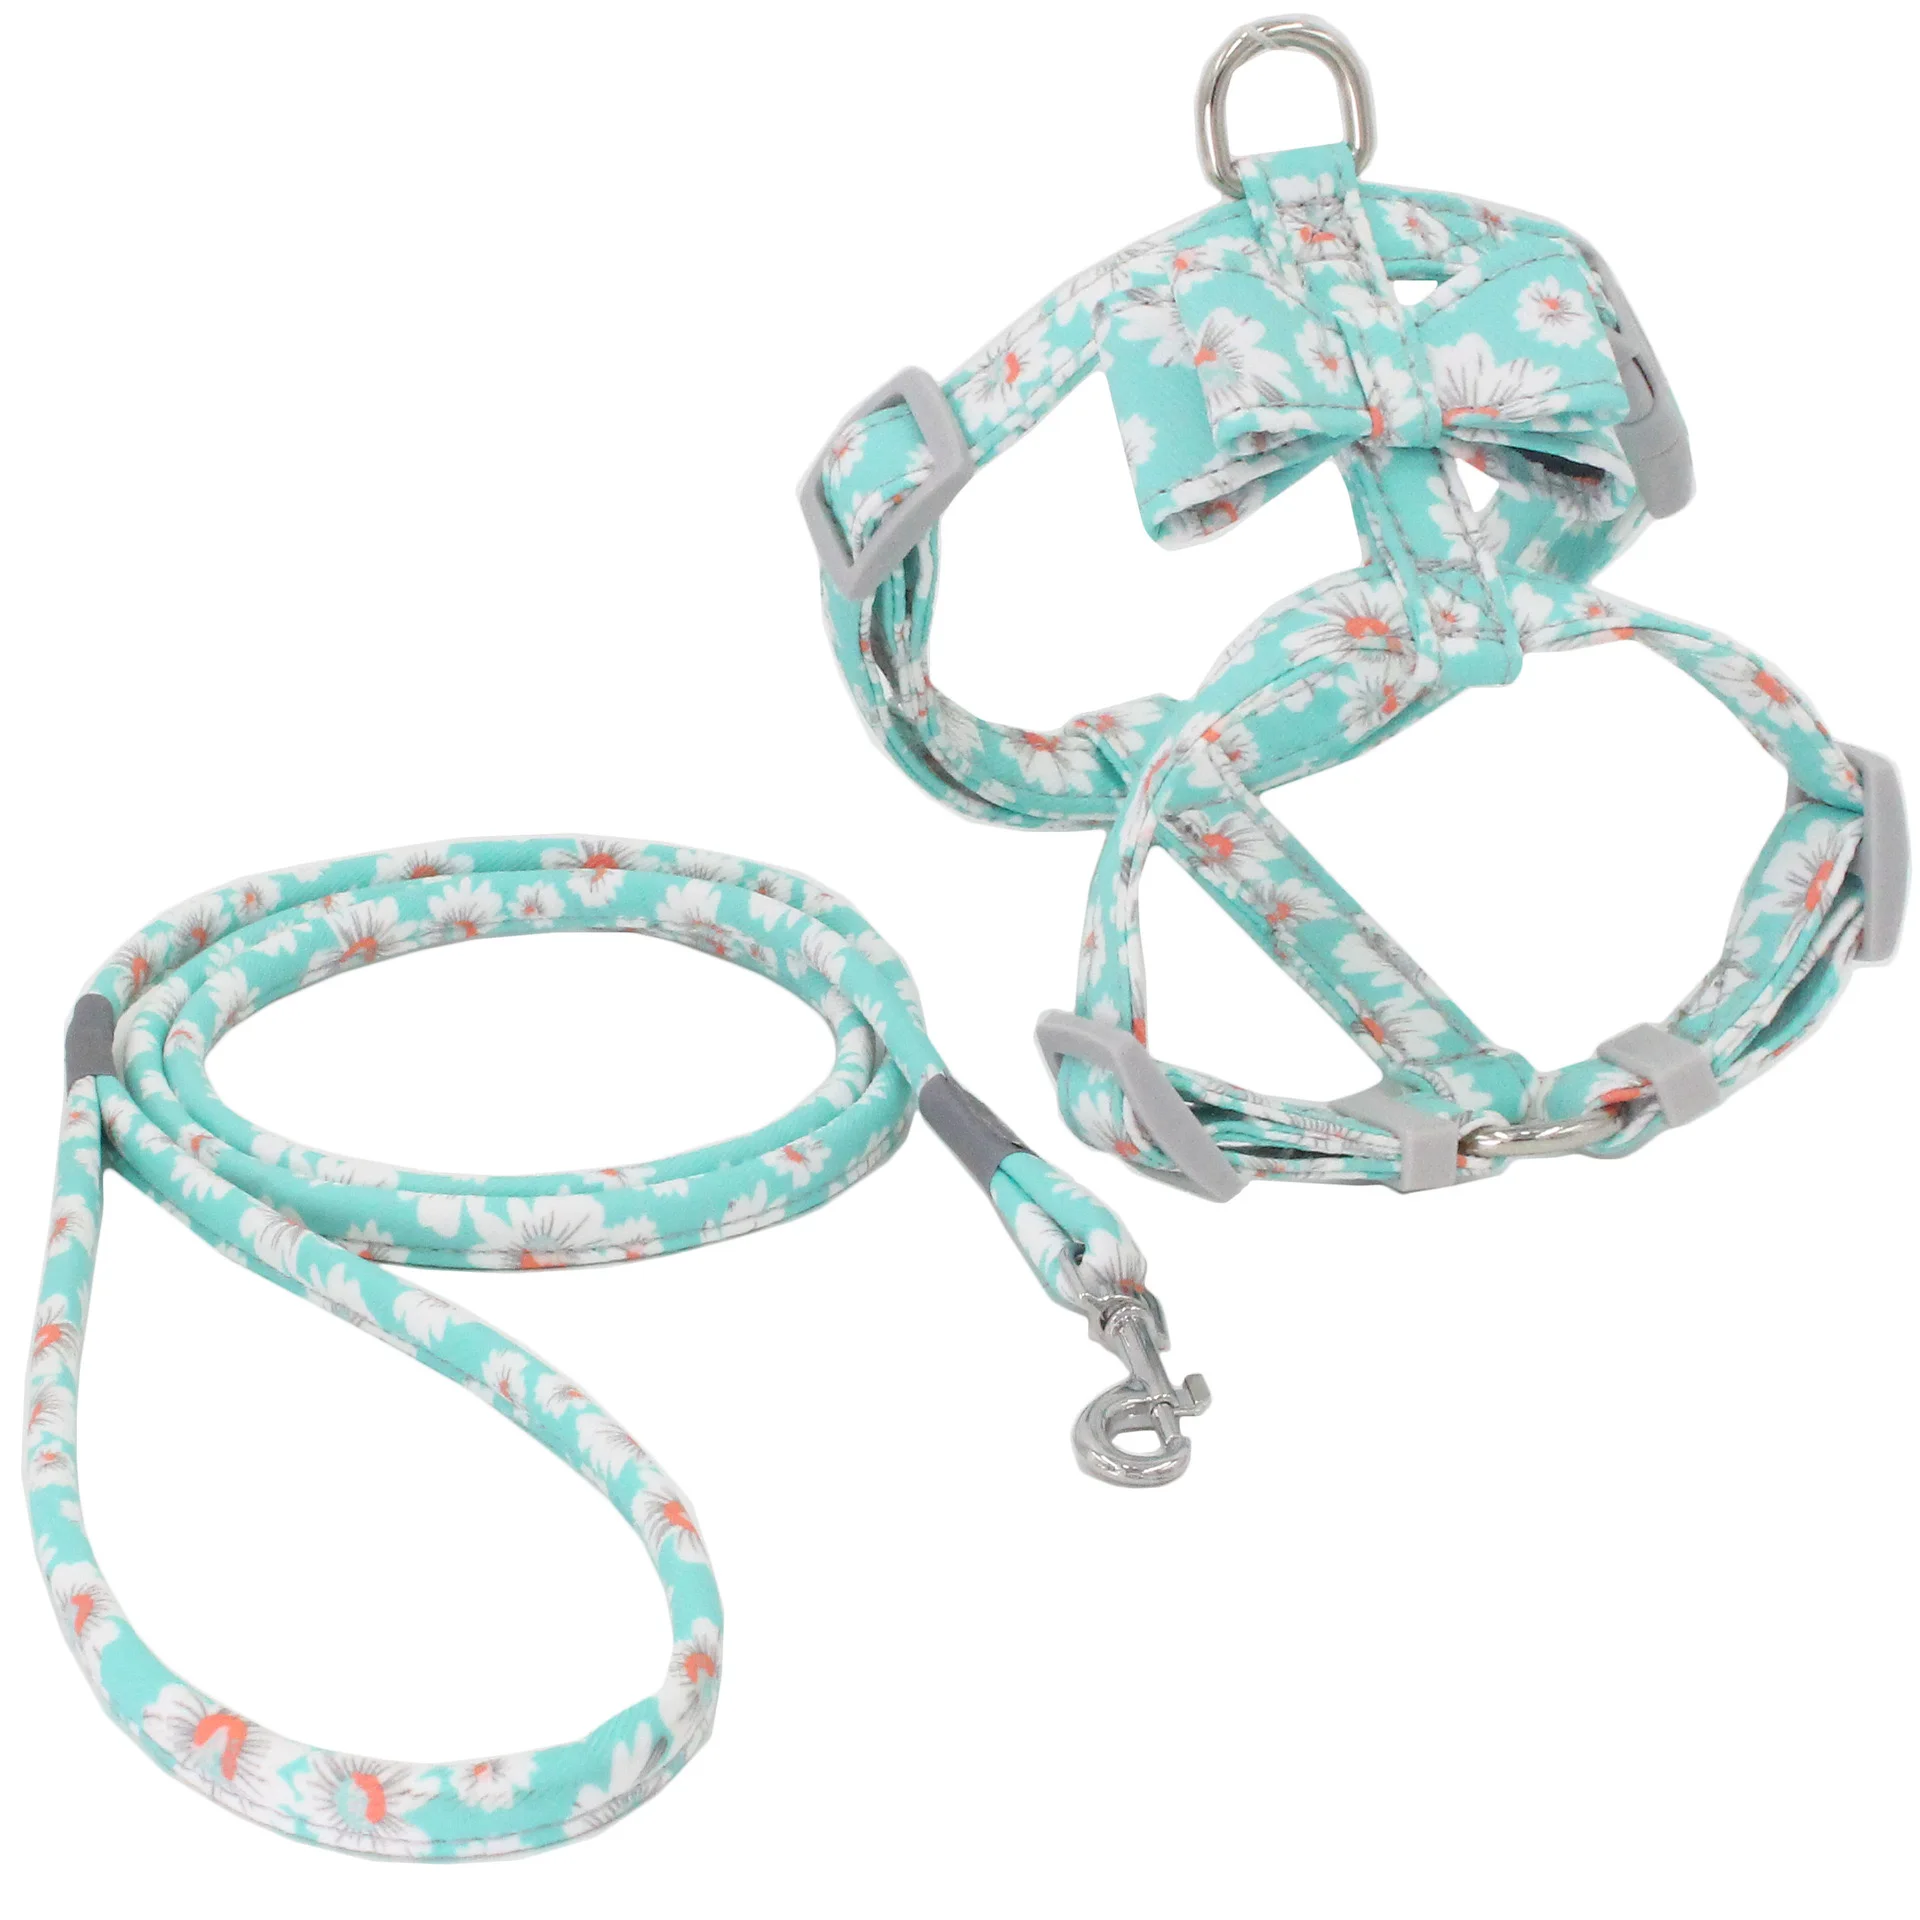 

Pets Dog Harness and Leash Set Cute Japanese Style Designed Print Adjustable Harness Bowtie Dog Products Amazon Pet Supplies, Customised